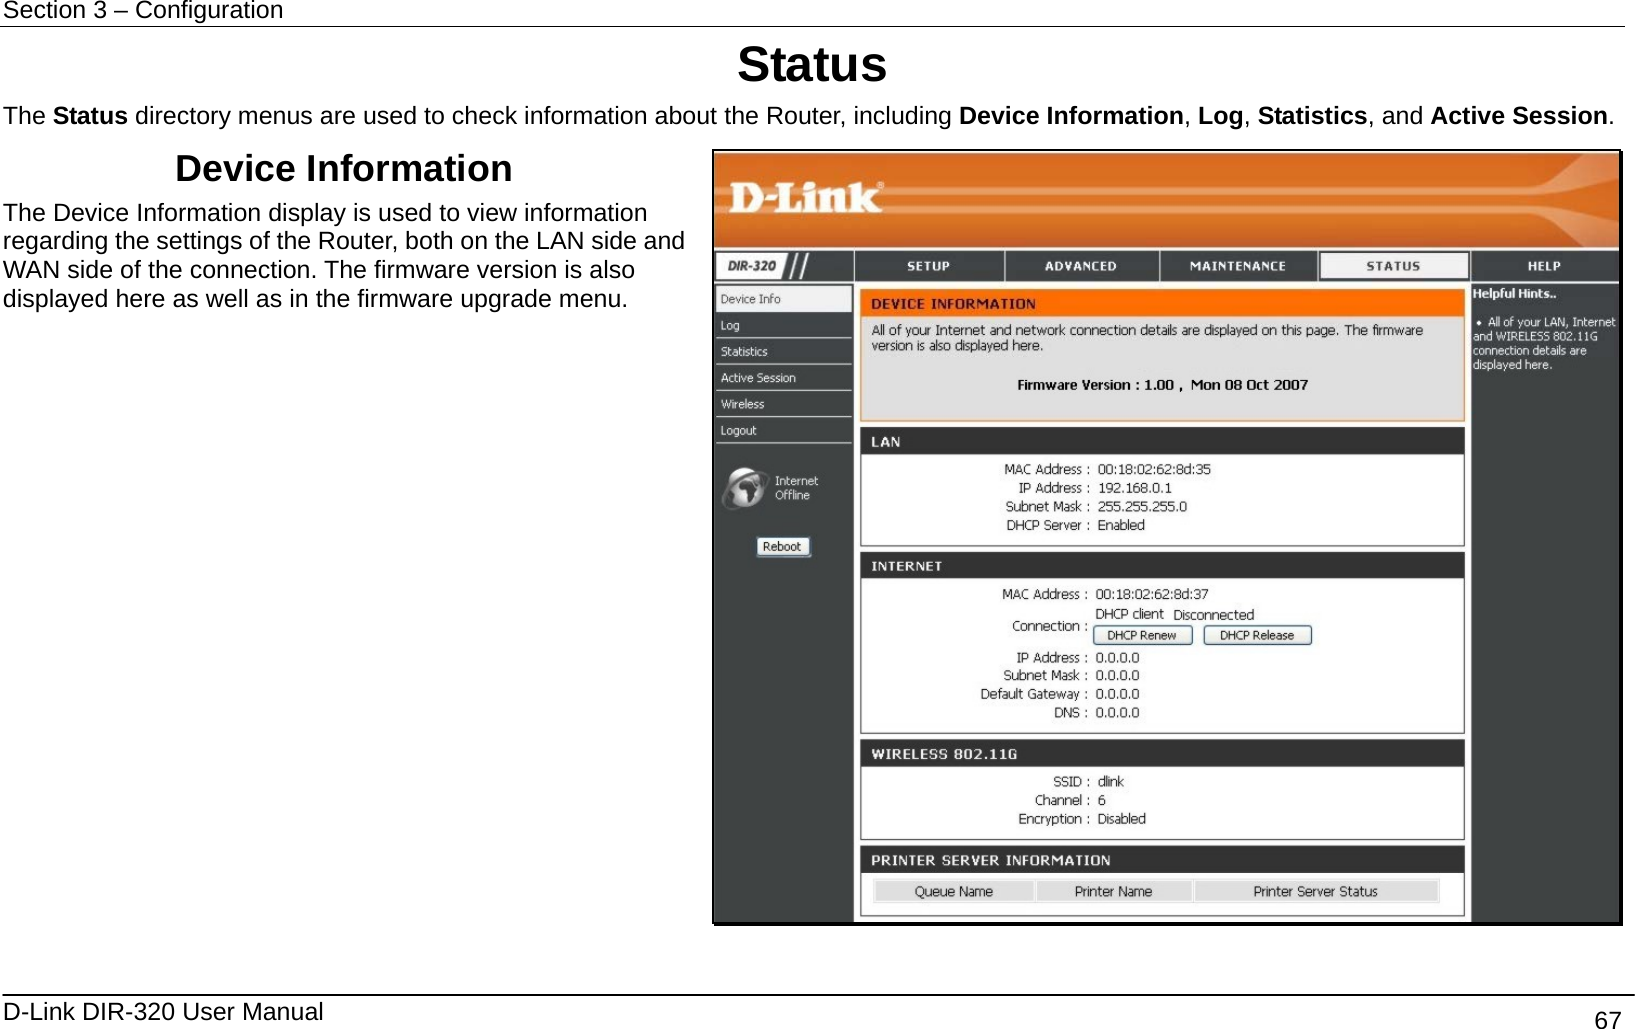 Section 3 – Configuration   D-Link DIR-320 User Manual                                       67 Status The Status directory menus are used to check information about the Router, including Device Information, Log, Statistics, and Active Session. Device Information   The Device Information display is used to view information regarding the settings of the Router, both on the LAN side and WAN side of the connection. The firmware version is also displayed here as well as in the firmware upgrade menu.   